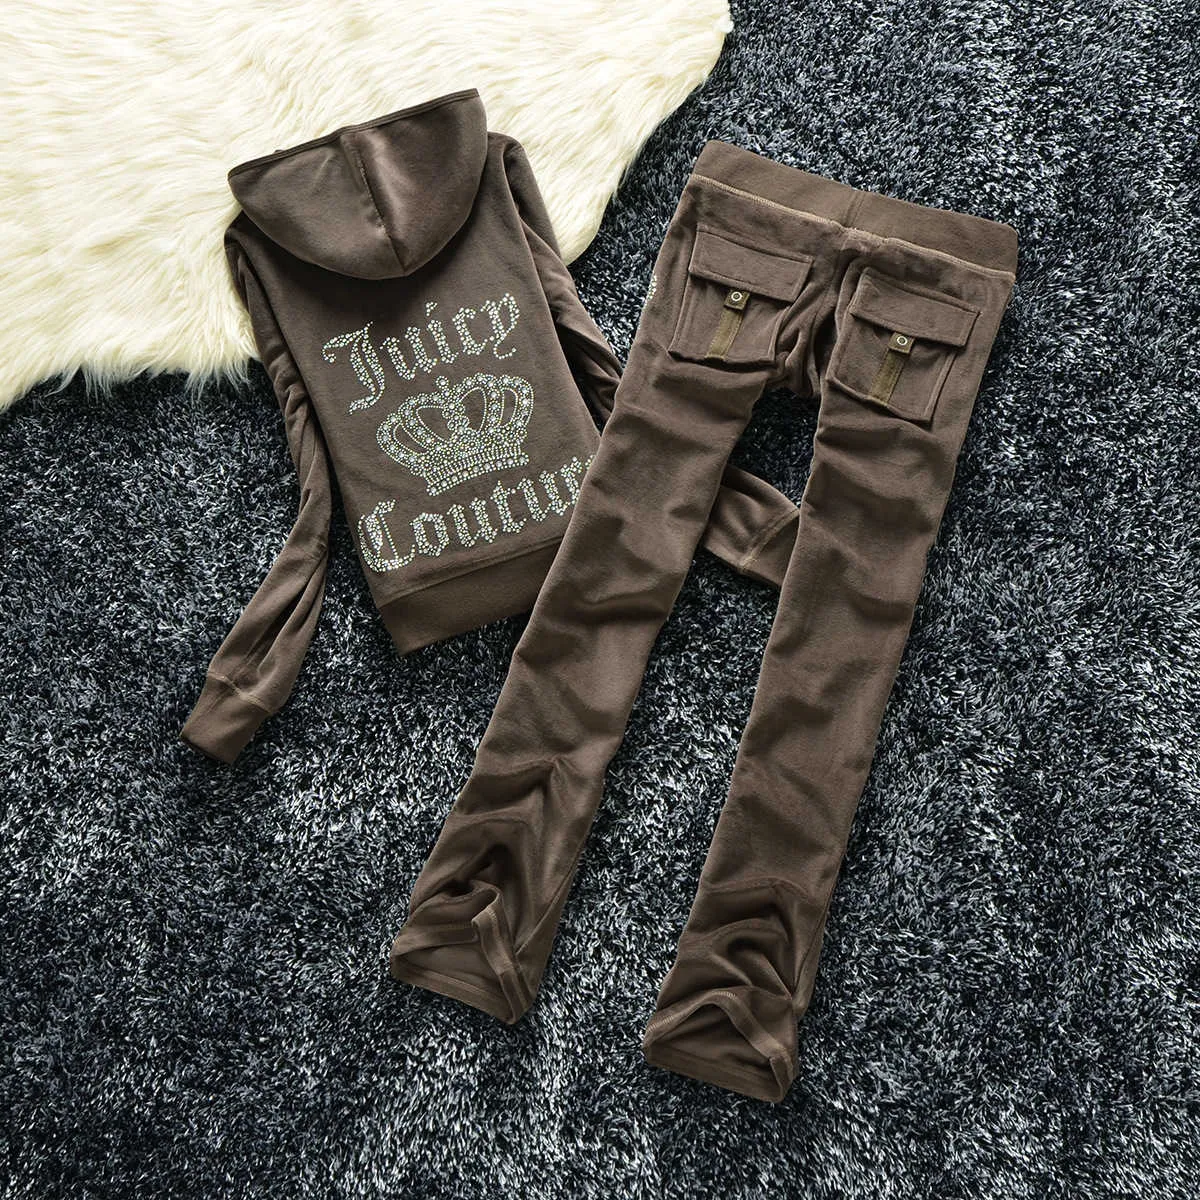 Juicy Coutoure Tracksuit Summer Brand Sying 2 Piece Set Velvet Velor Women Track Suit Hoodies and Pants Met Dreating Design 50ESS 138